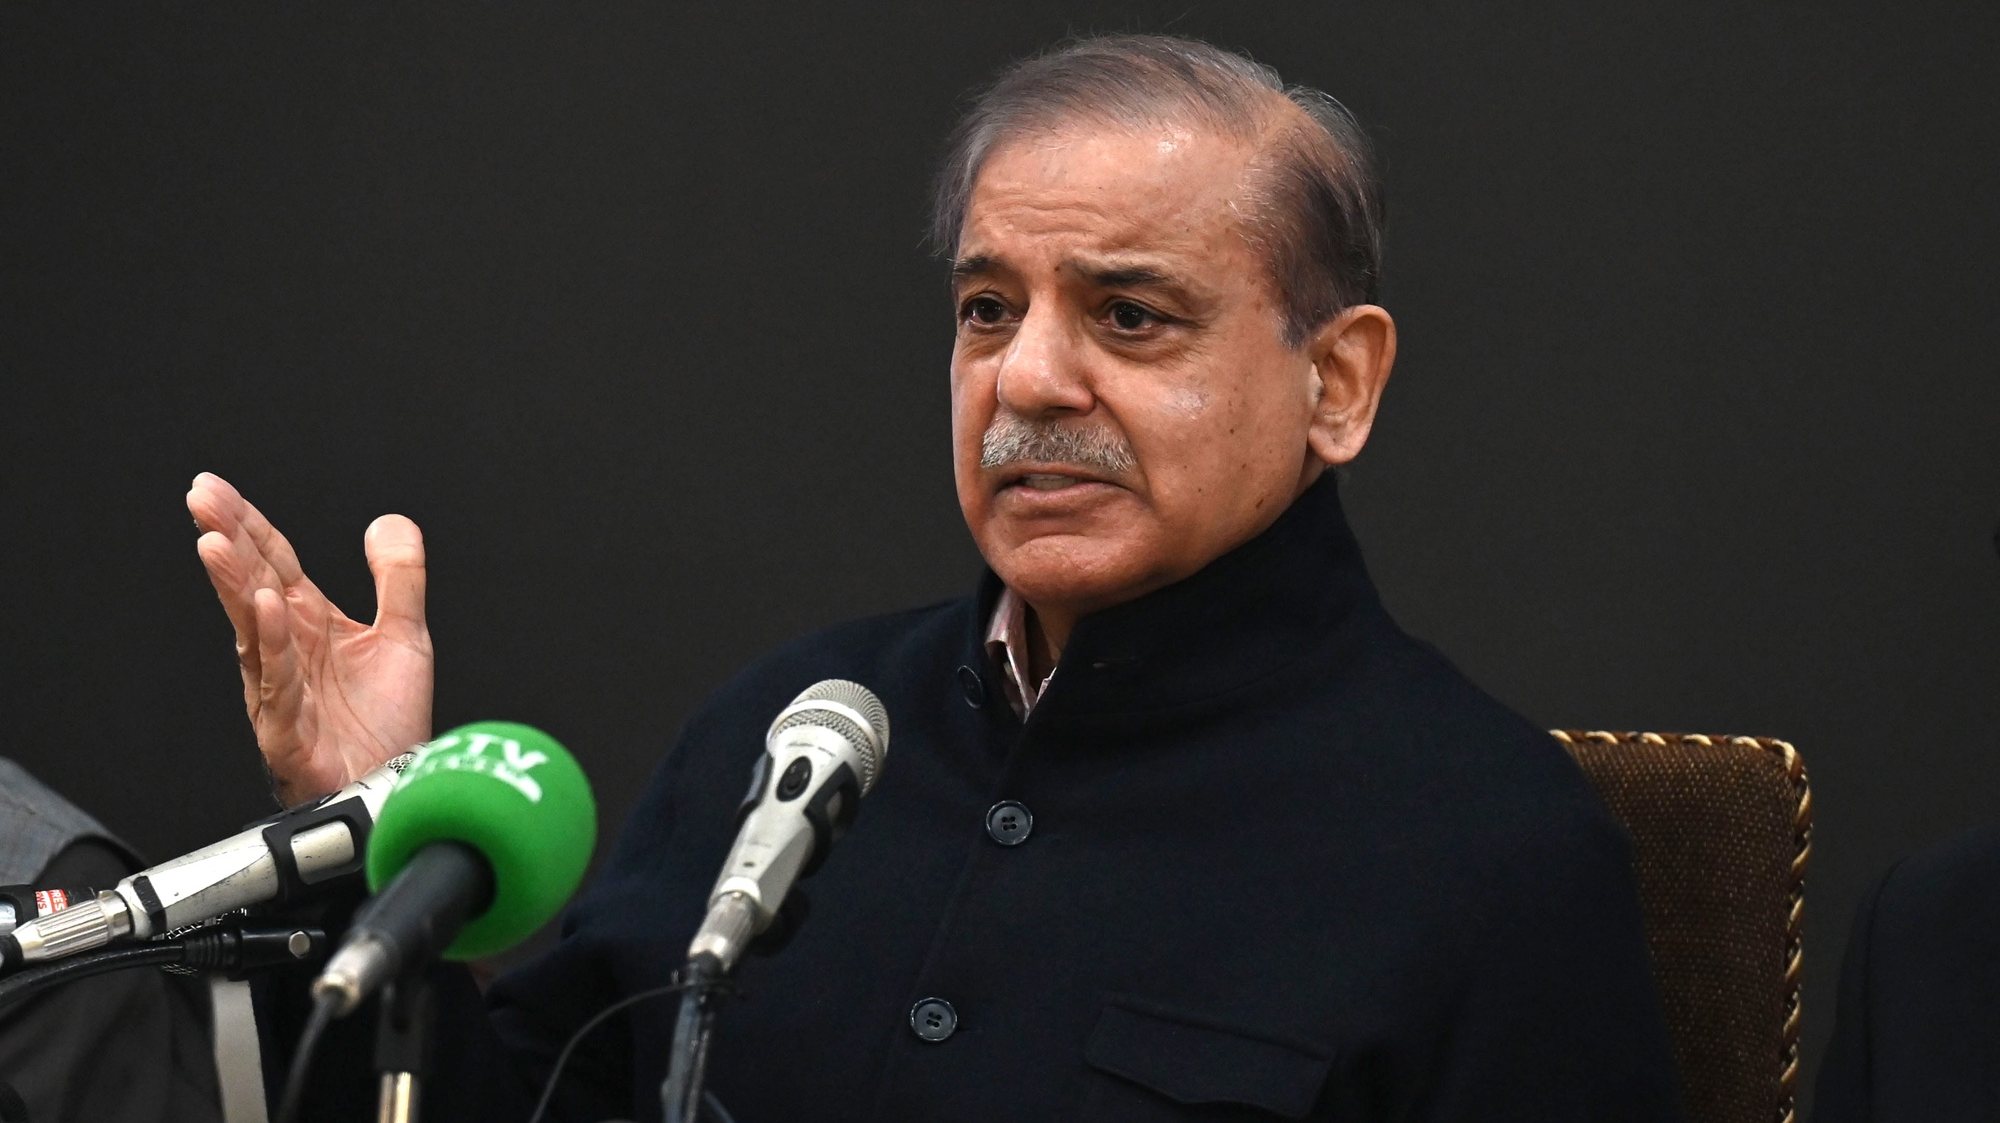 epa11150098 Pakistan&#039;s former prime minister and leader of the Pakistan Muslim League-Nawaz (PML-N) party Shehbaz Sharif speaks during a press conference in Lahore, Pakistan, 13 Feburay 2024. PML-N president Shahbaz Sharif announced that the party will sit on the opposition benches if independent candidates form a government at the Centre. He stated that PML-N is in contact with PPP, MQM-P, and JUI parties and they will form an alliance under the leadership of Nawaz Sharif.  EPA/RAHAT DAR